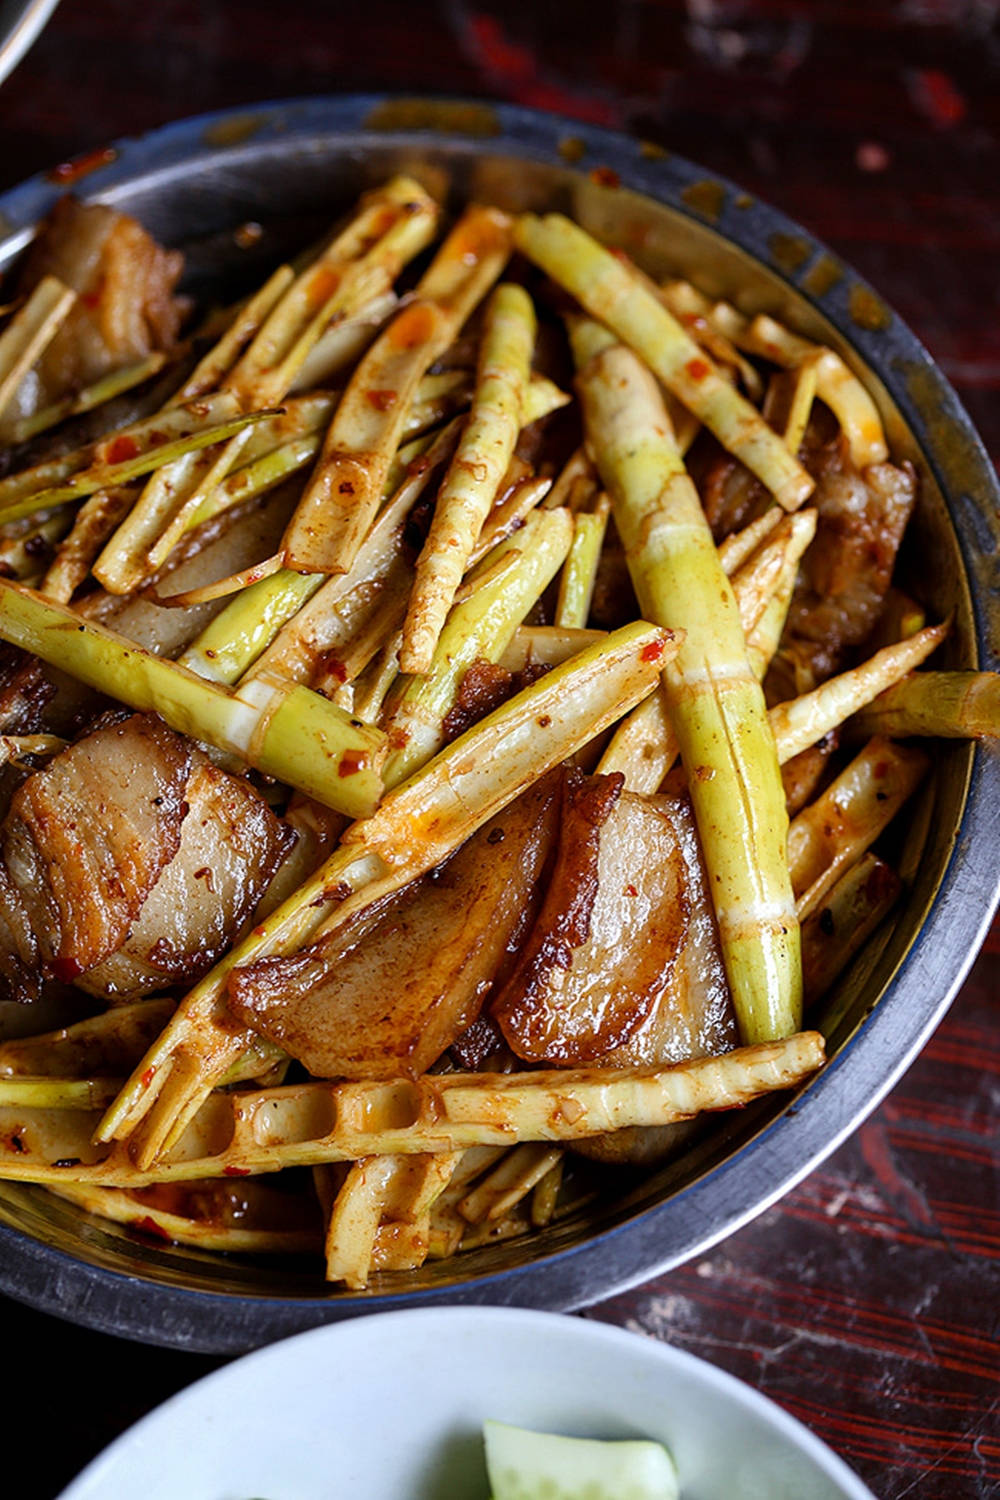 Braised Vegetable Bamboo Shoots With Pork Wallpaper